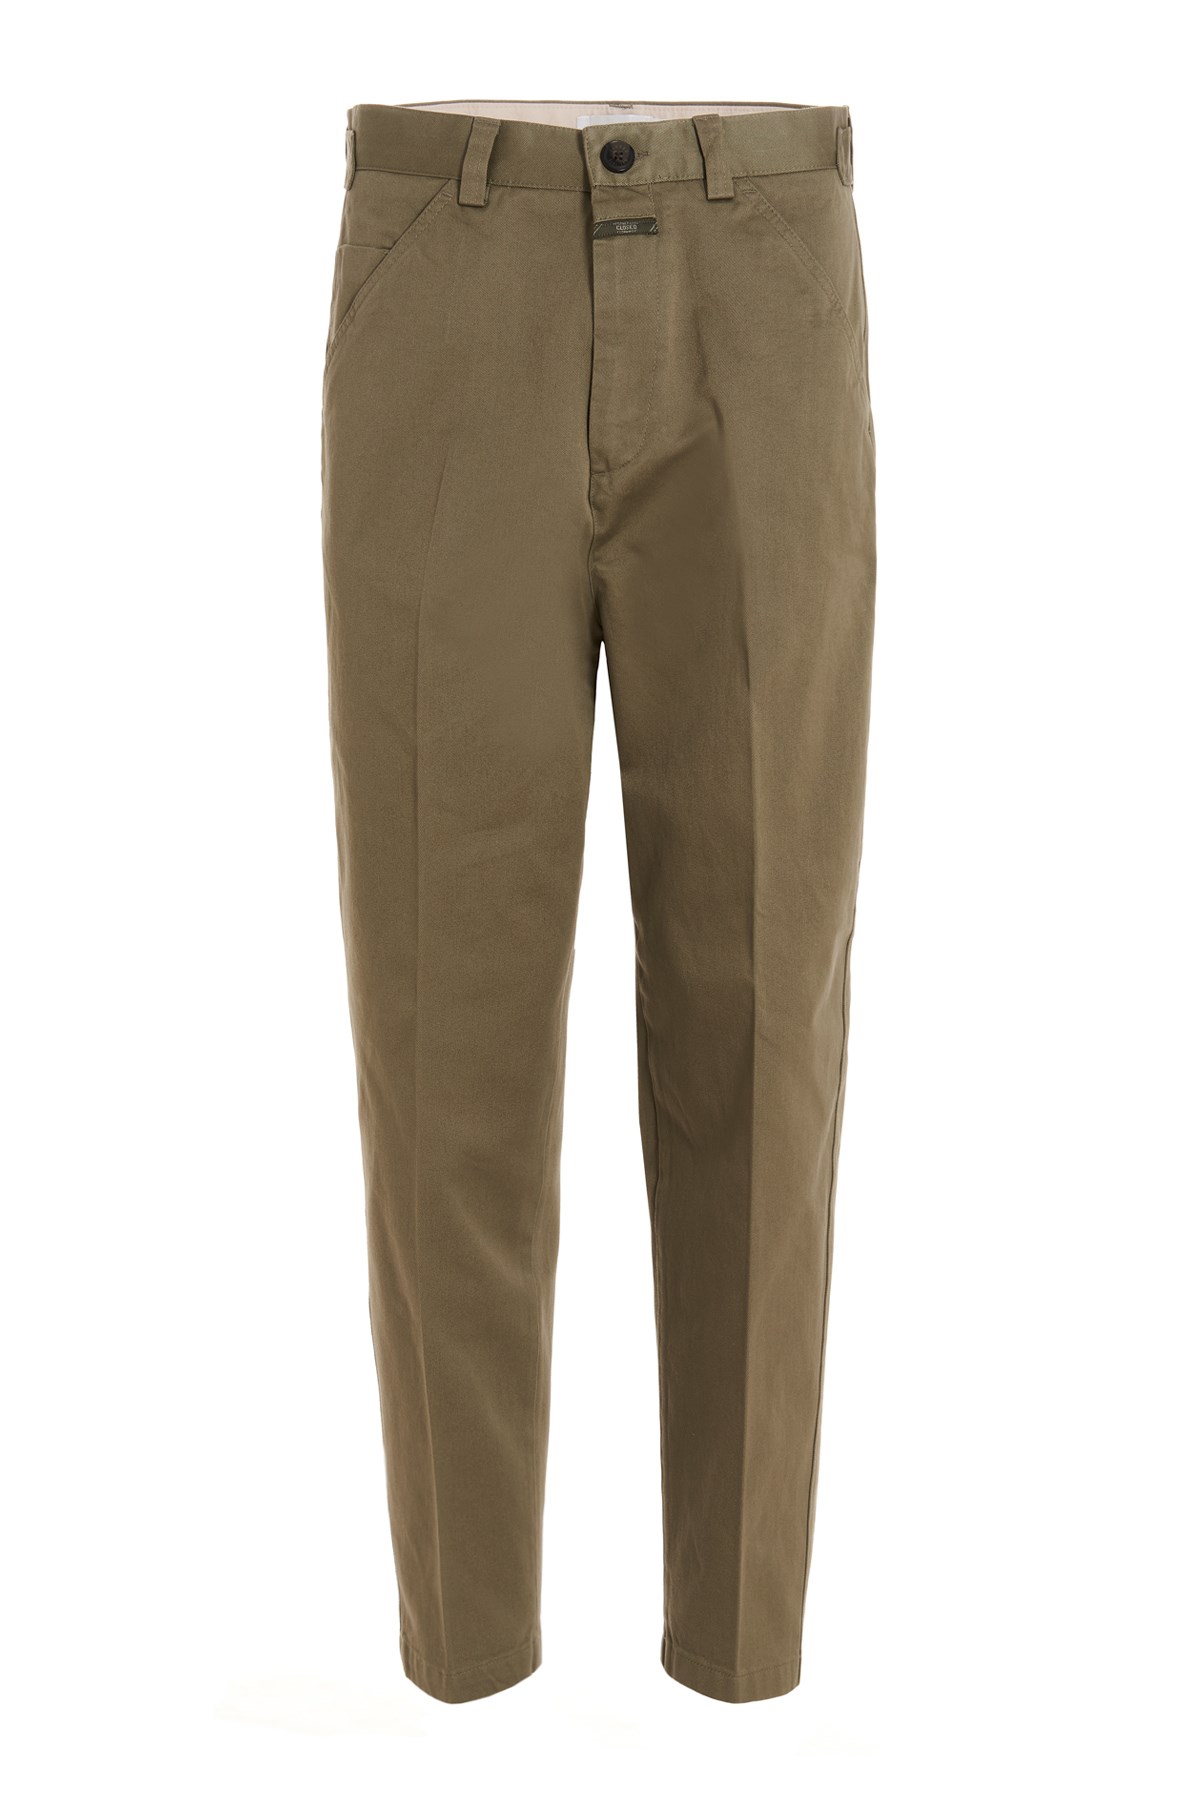 CLOSED 'Dover Tapered’ Chino Pants